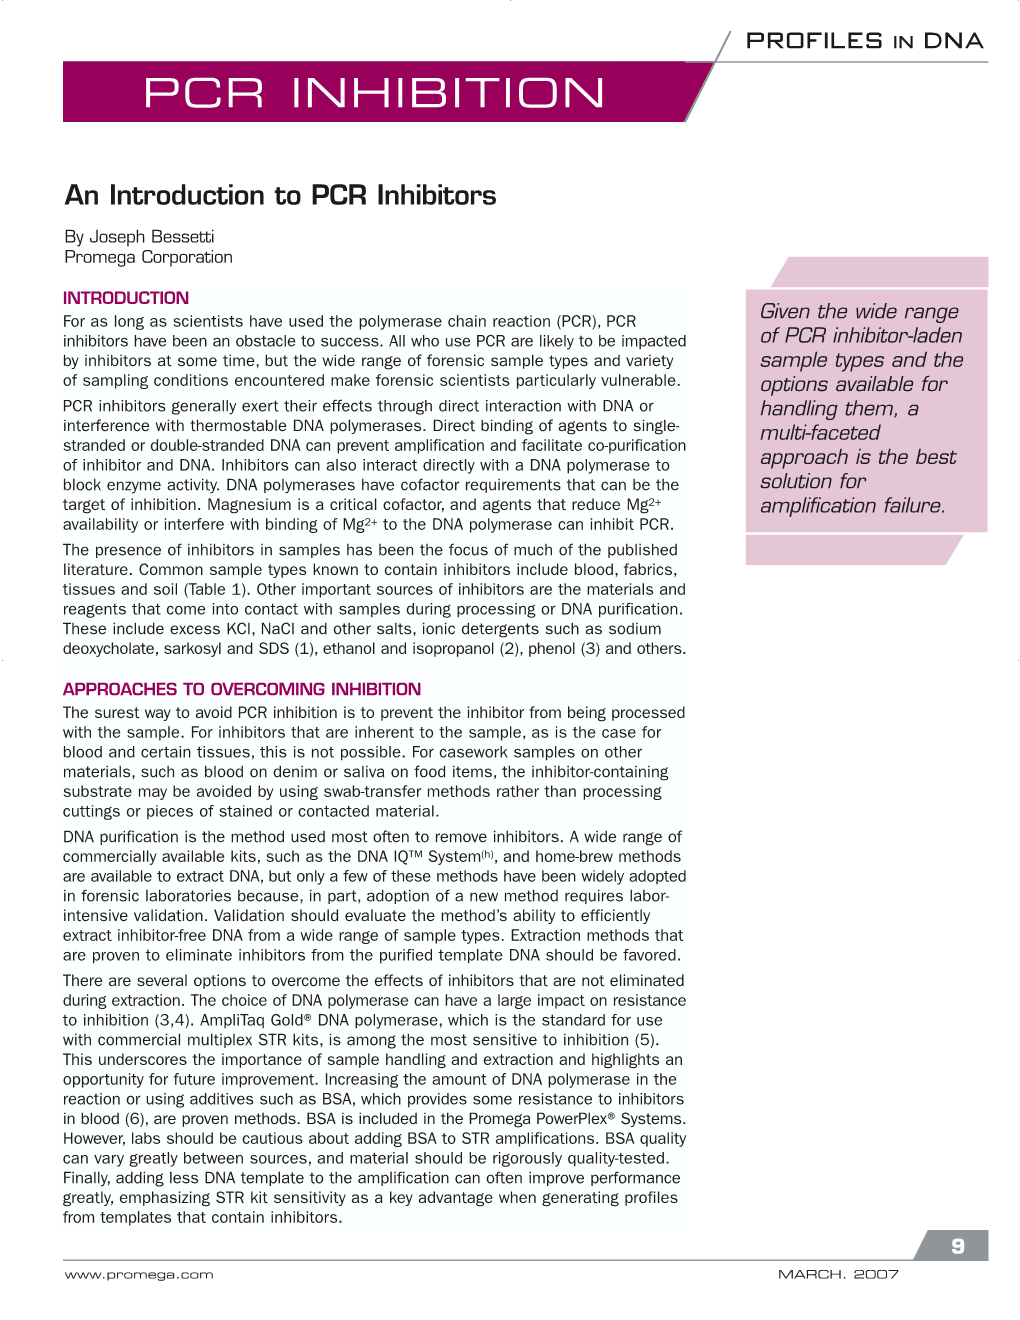 An Introduction to PCR Inhibitors